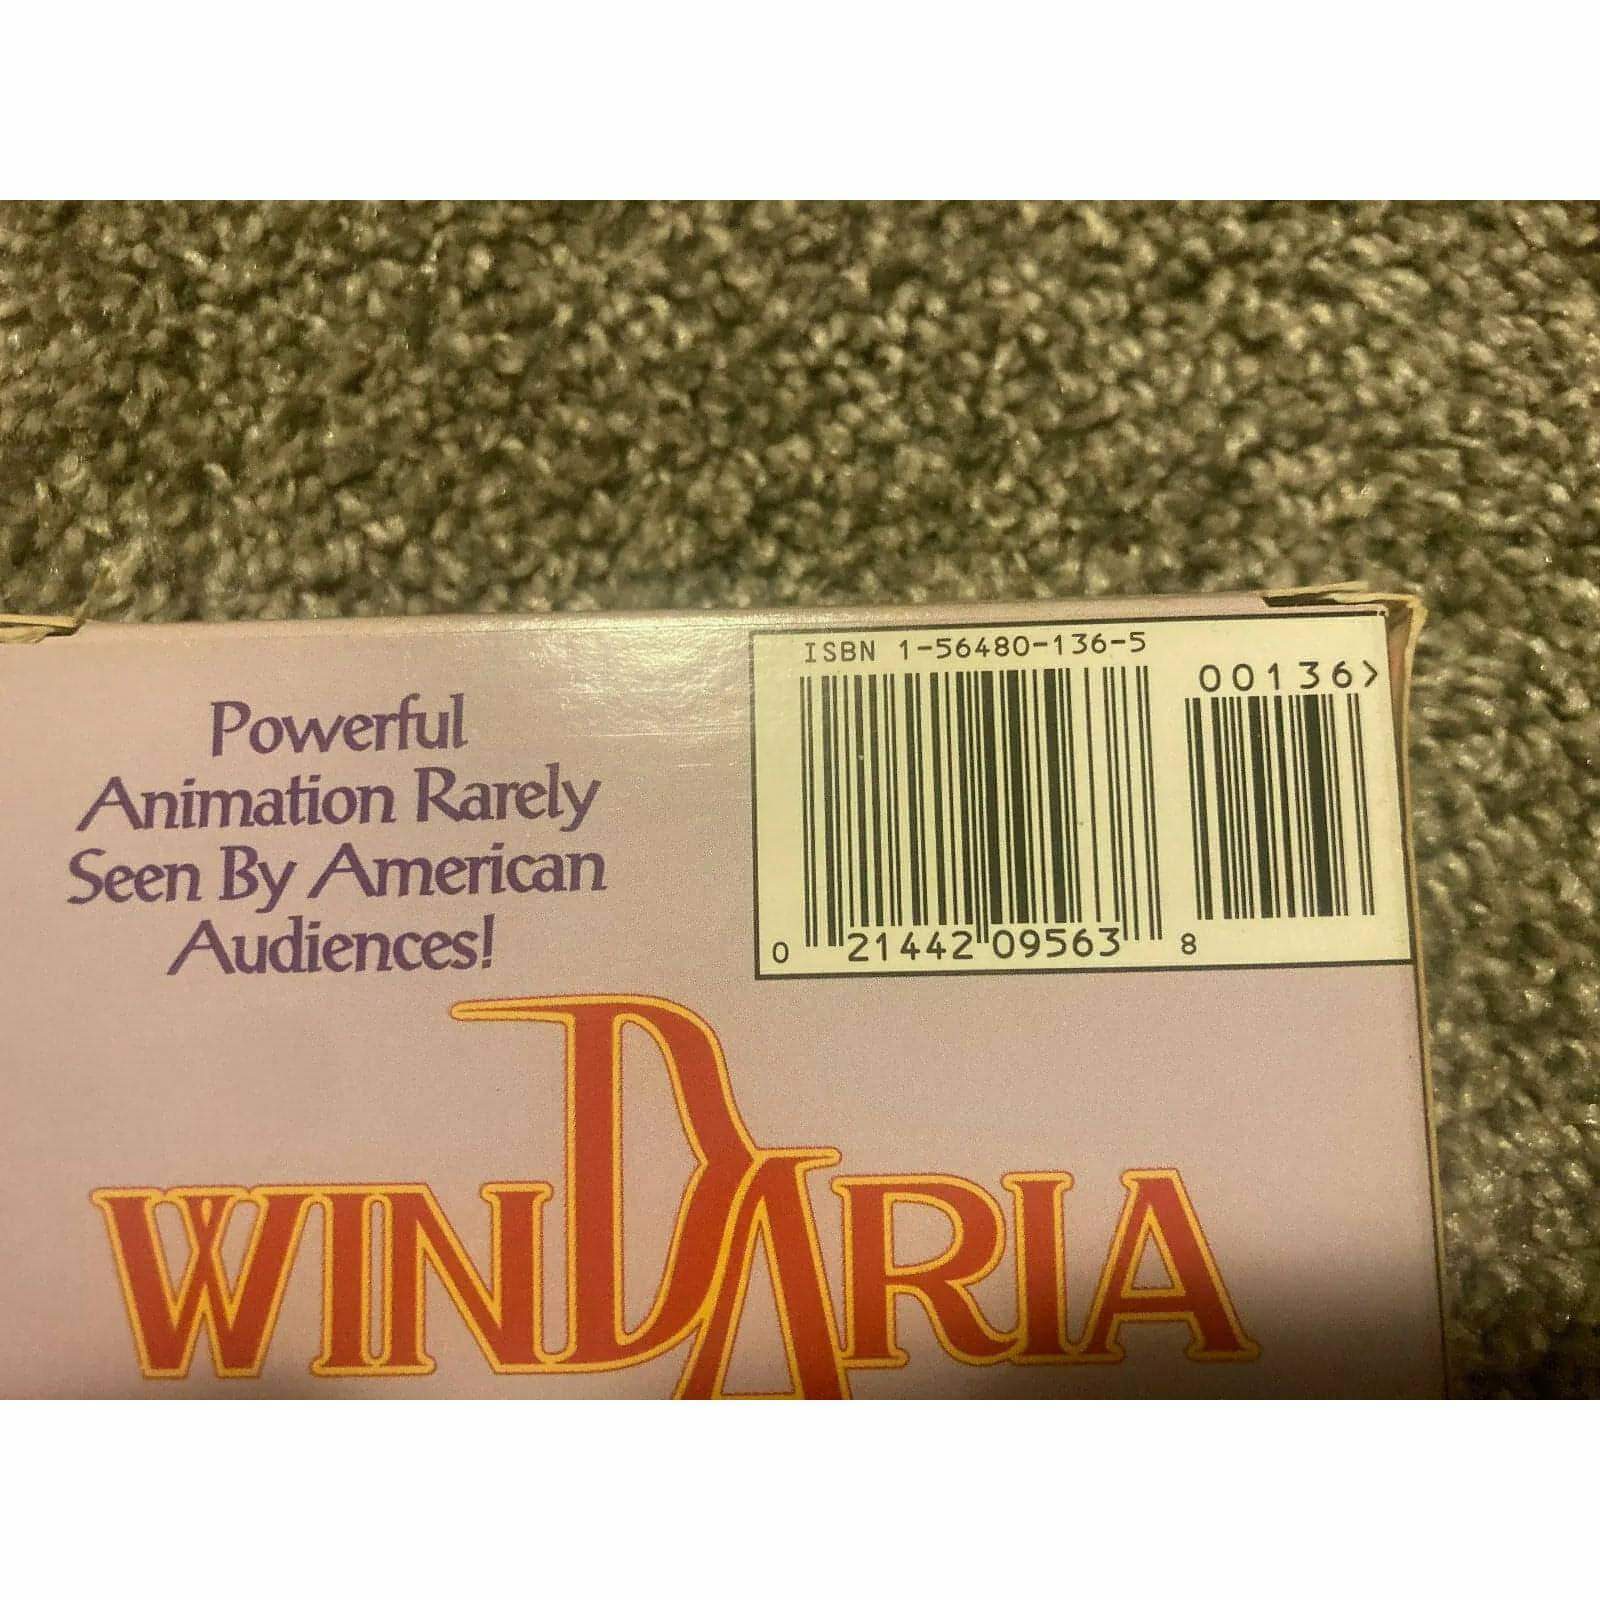 Windaria Once Upon a Time (Vintage VHS,1993) BooksCardsNBikes